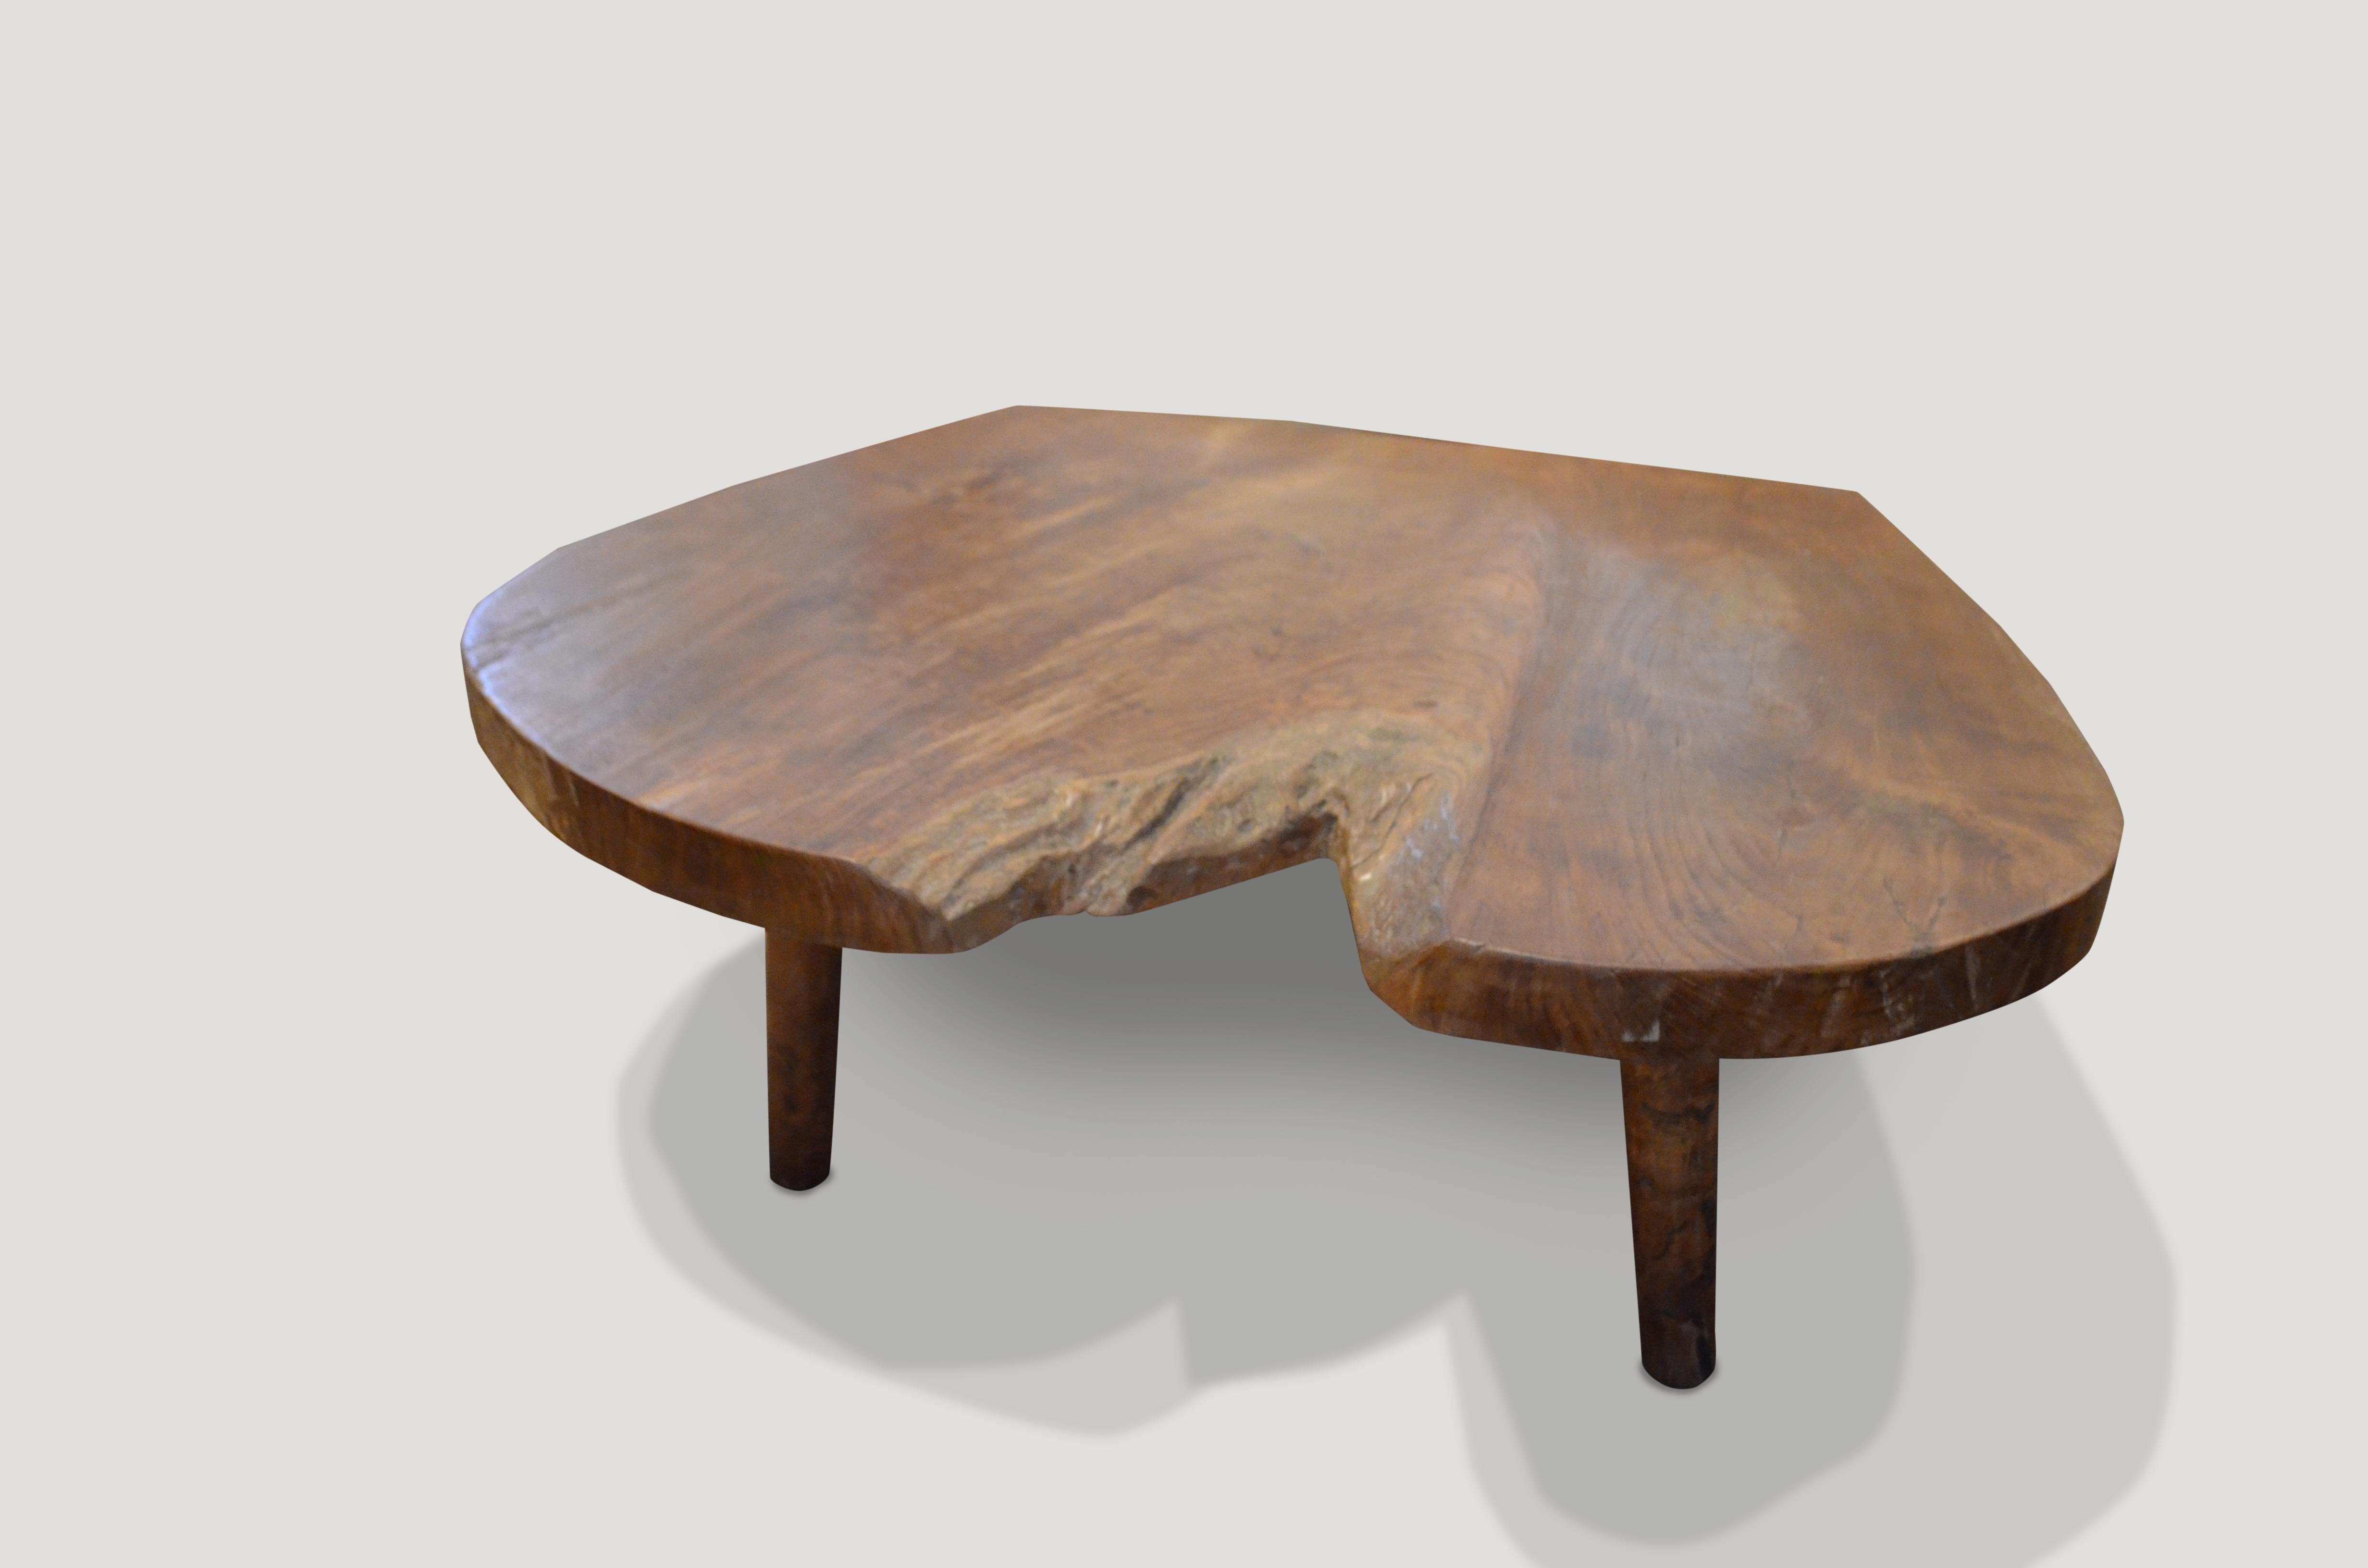 Reclaimed single slab teak coffee table with a natural oil finish. Floating on mid century style legs.

Own an Andrianna Shamaris original. 

Andrianna Shamaris. The Leader In Modern Organic Design™